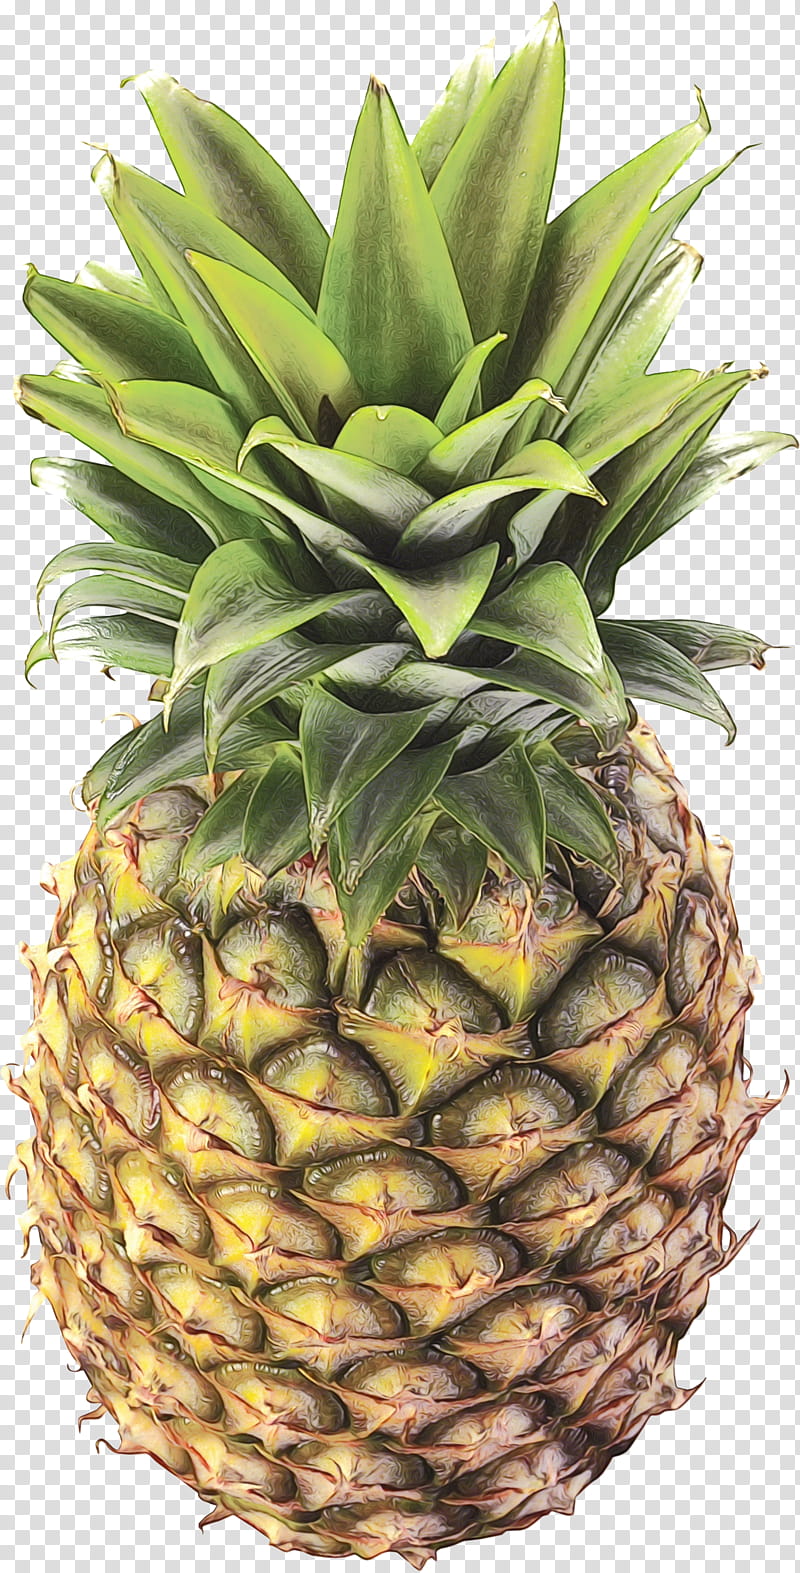 Juice, Pineapple, Fruit, Food, Pineapples, Natural Foods, Ananas, Plant transparent background PNG clipart